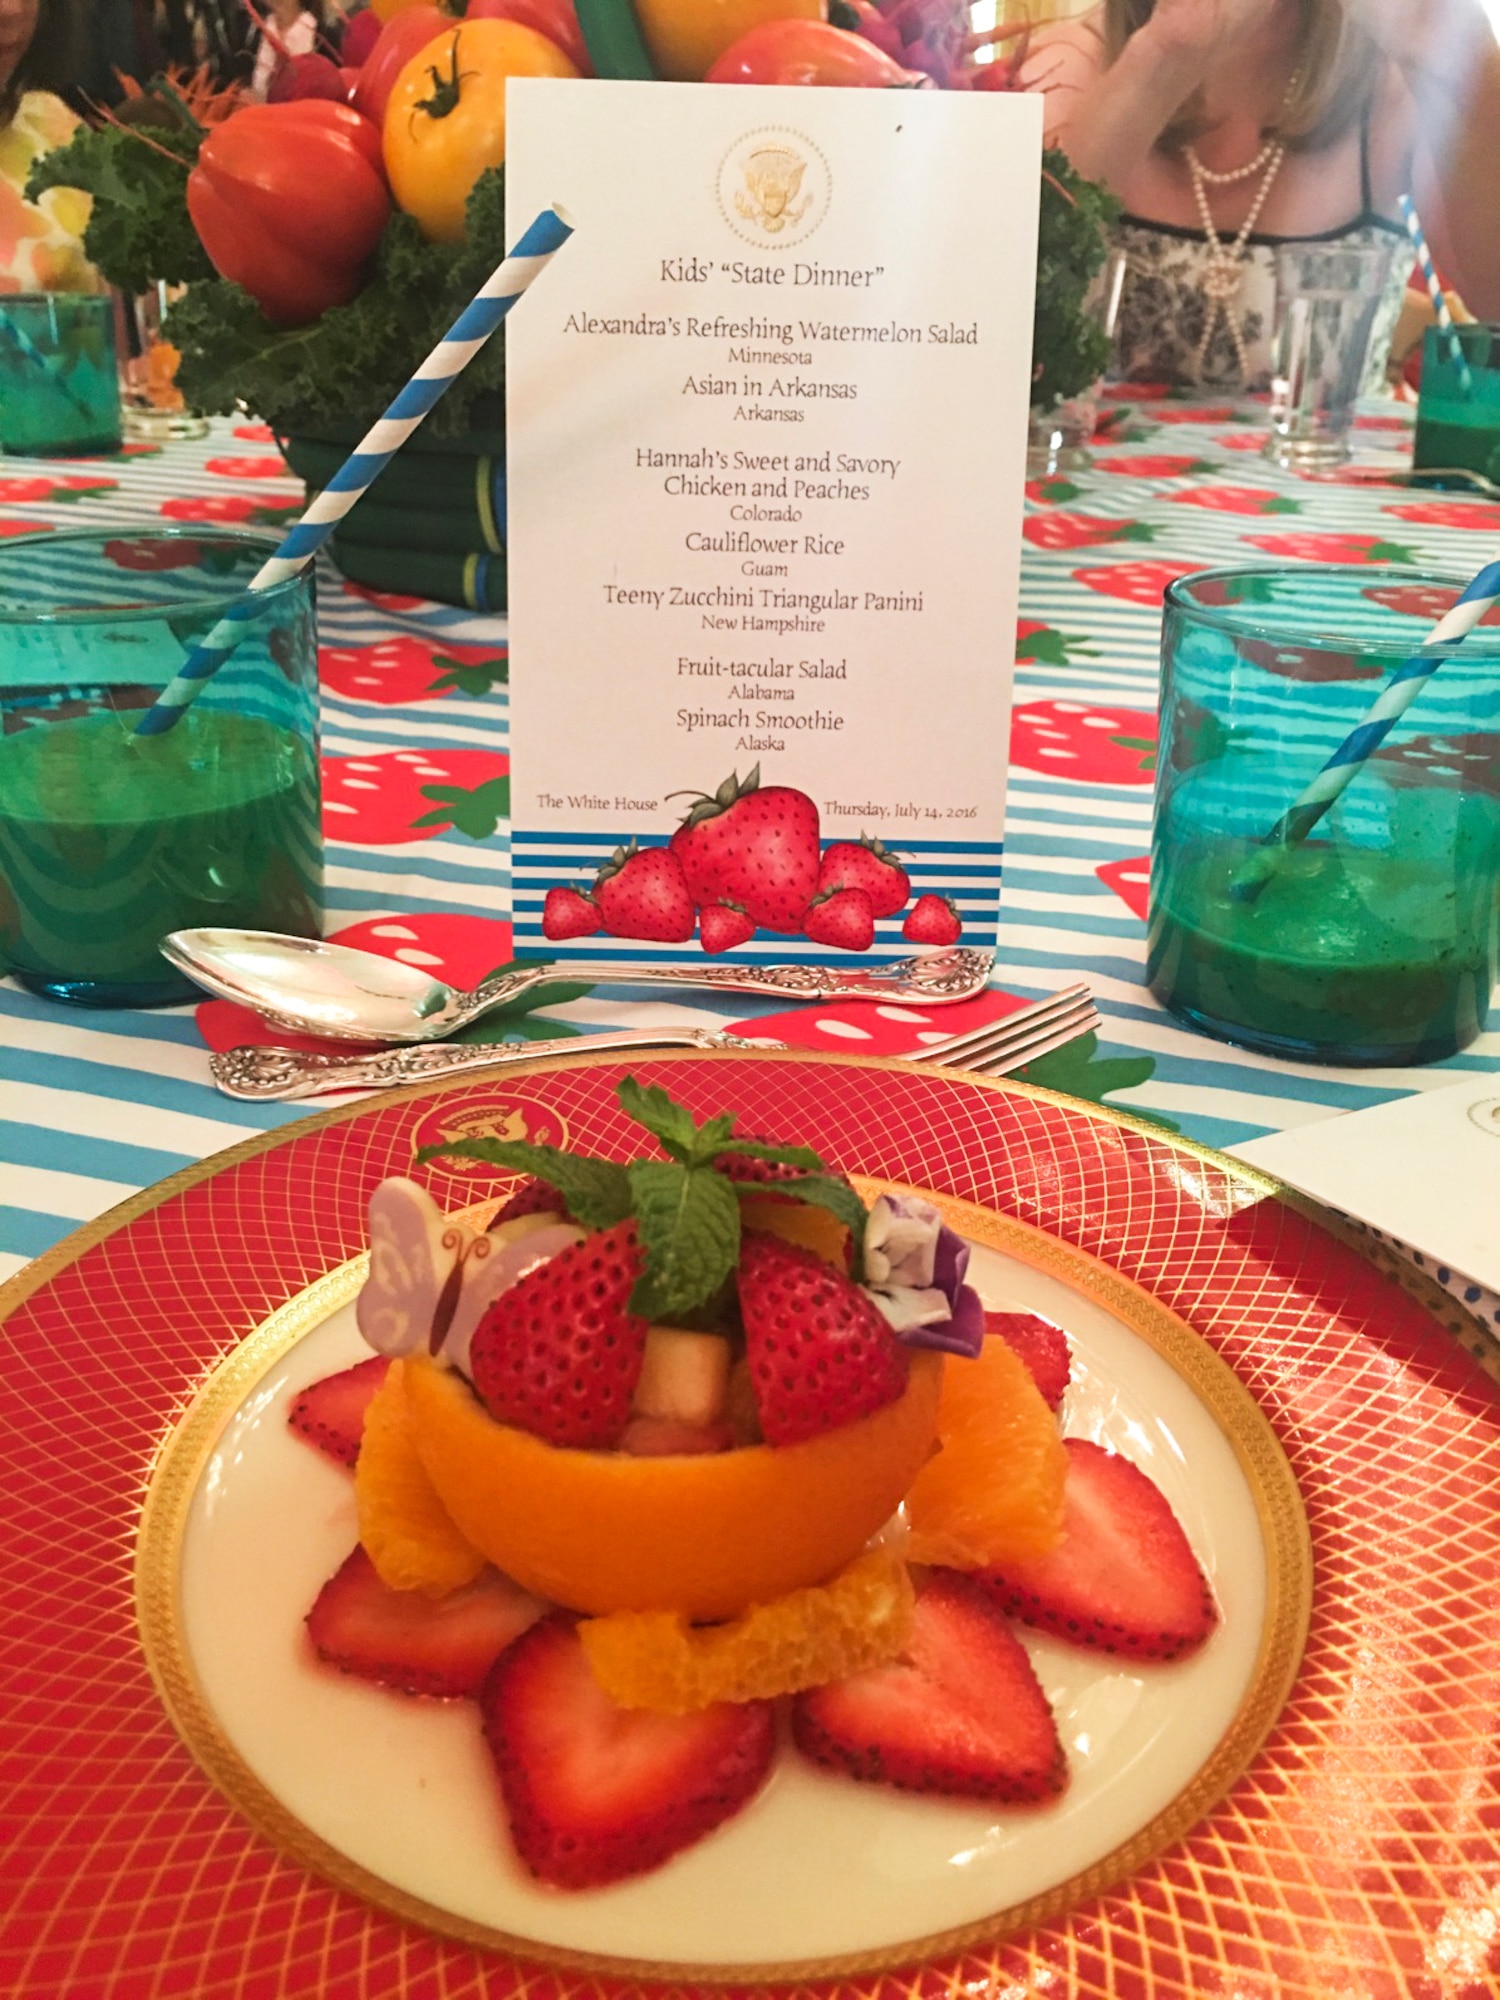 The White House chefs serve 2016 Alabama Healthy Lunchtime Challenge winner Lael Jefferson’s, ‘fruit-tacular’ salad during the 2016 Kid’s State Dinner hosted by the White House, July 14, 2016. Lael won the nationwide recipe challenge for the state of Alabama with her healthy green chicken and fruit-tacular salad recipe. (Courtesy photo)